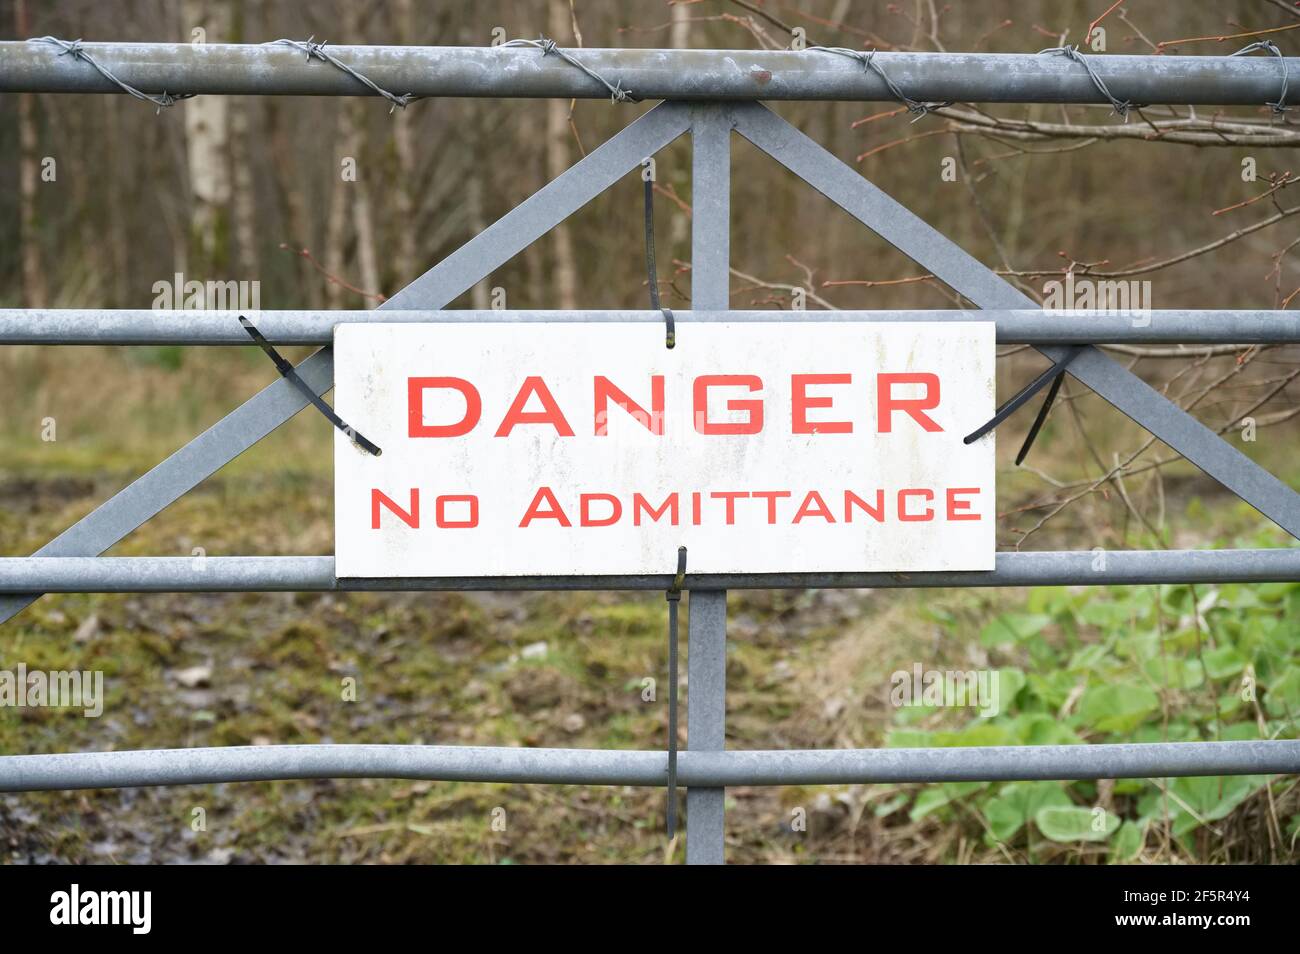 Danger no admittance entry sign on gate Stock Photo